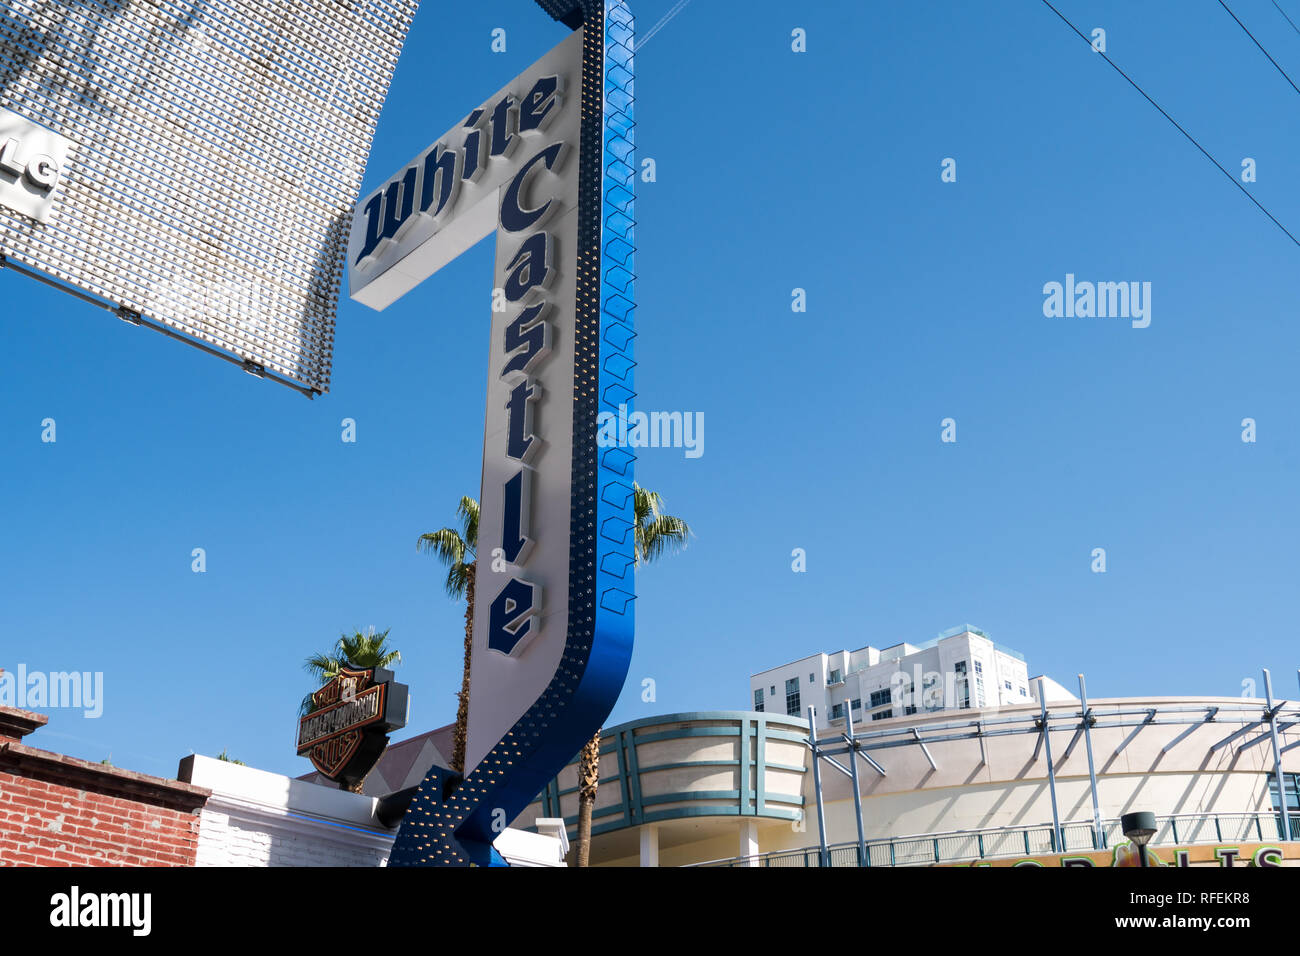 Las Vegas, Nevada - October 13, 2017:   : White Castle fast food restaurant sign on Fremont Street in downtown Las Vegas, attracts tourists for its ch Stock Photo